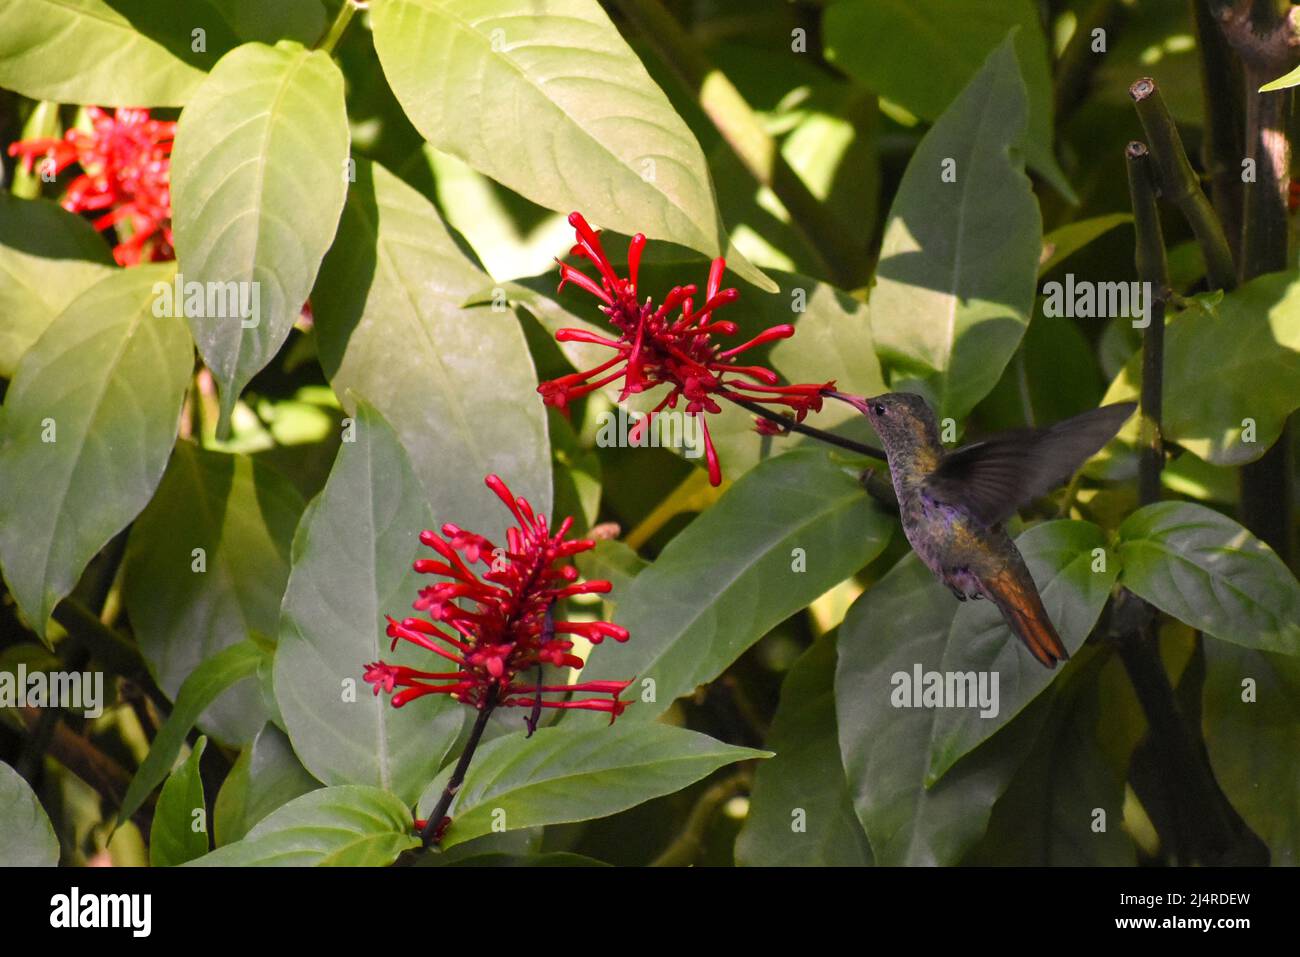 gilded sapphire (Hylocharis chrysura), also known as the gilded hummingbird, seen in Buenos Aires city Stock Photo